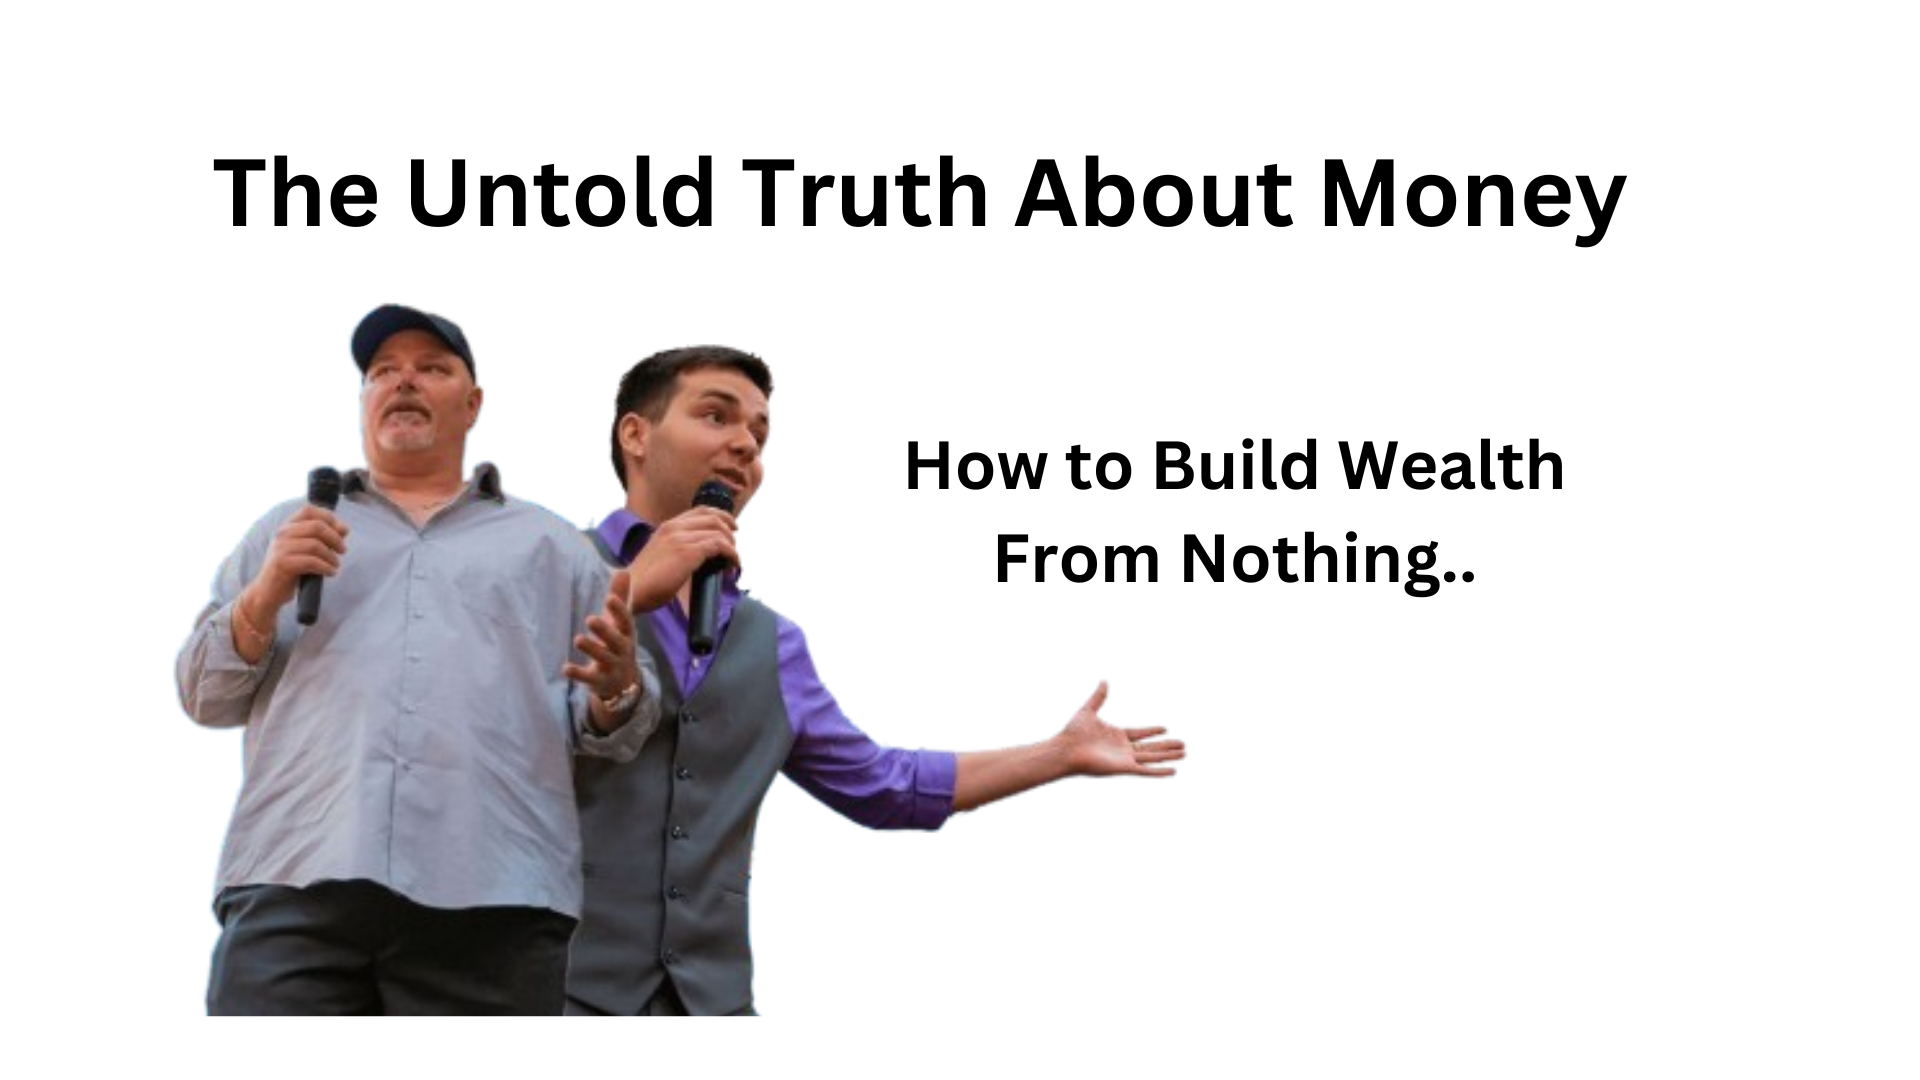 The Untold Truth About Money - How to Build Wealth From Nothing